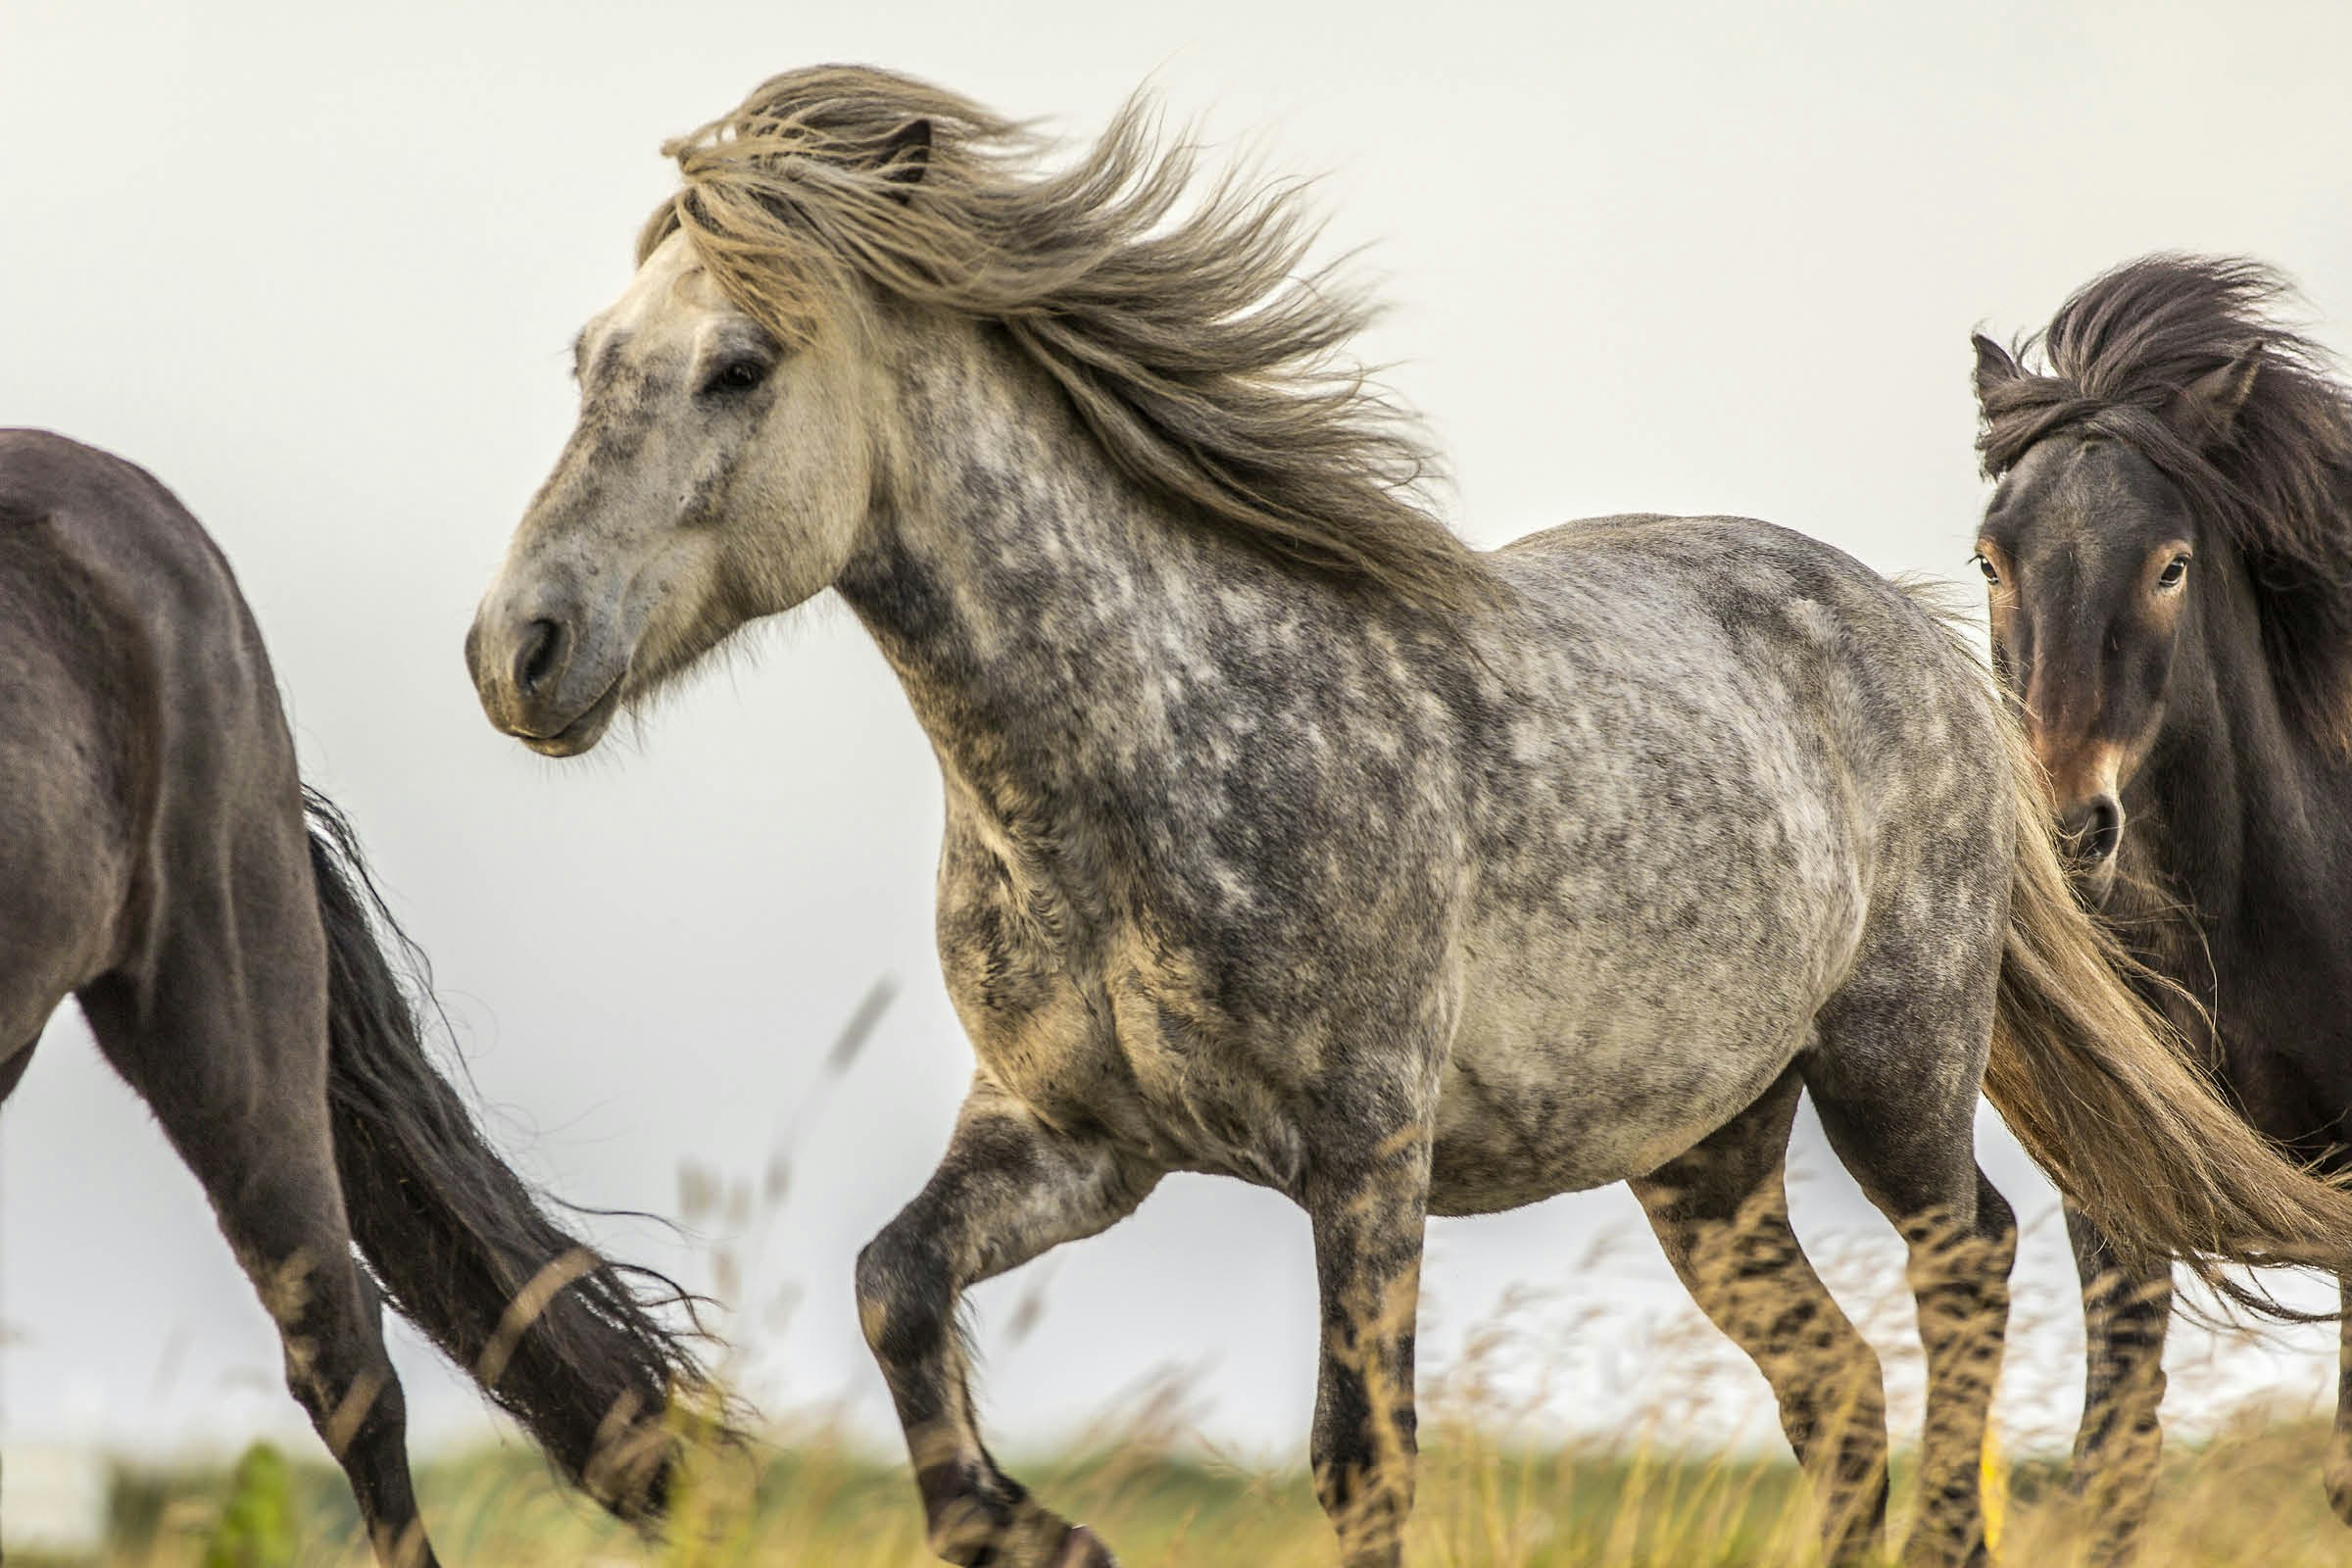 Wind blows the mane of an Icelandic horse